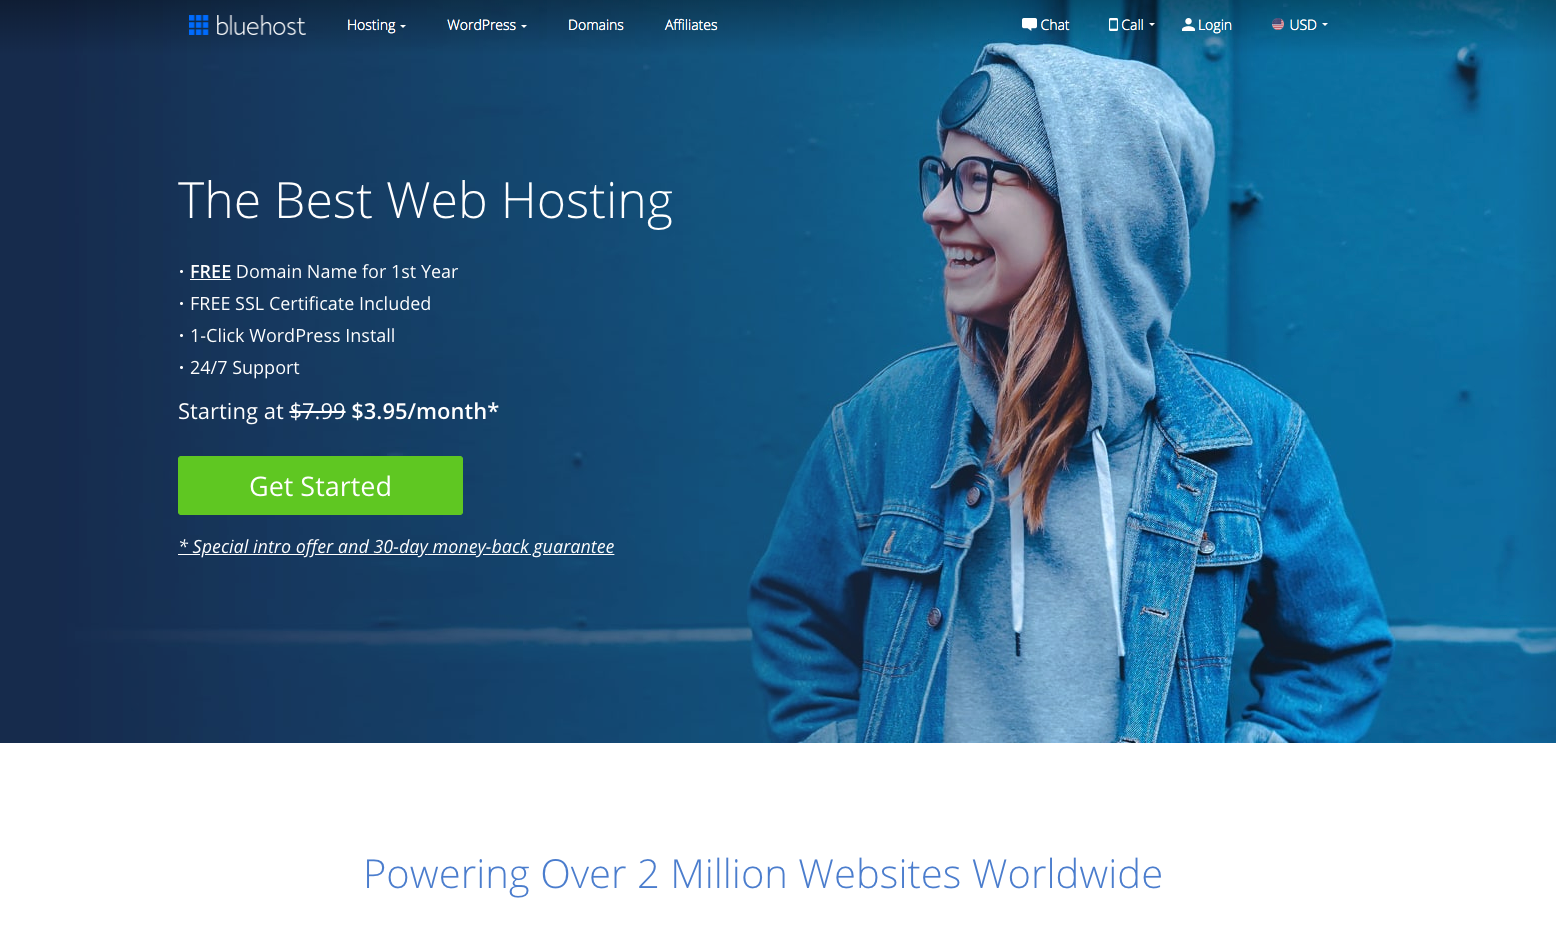 WordPress with BlueHost: Get Started